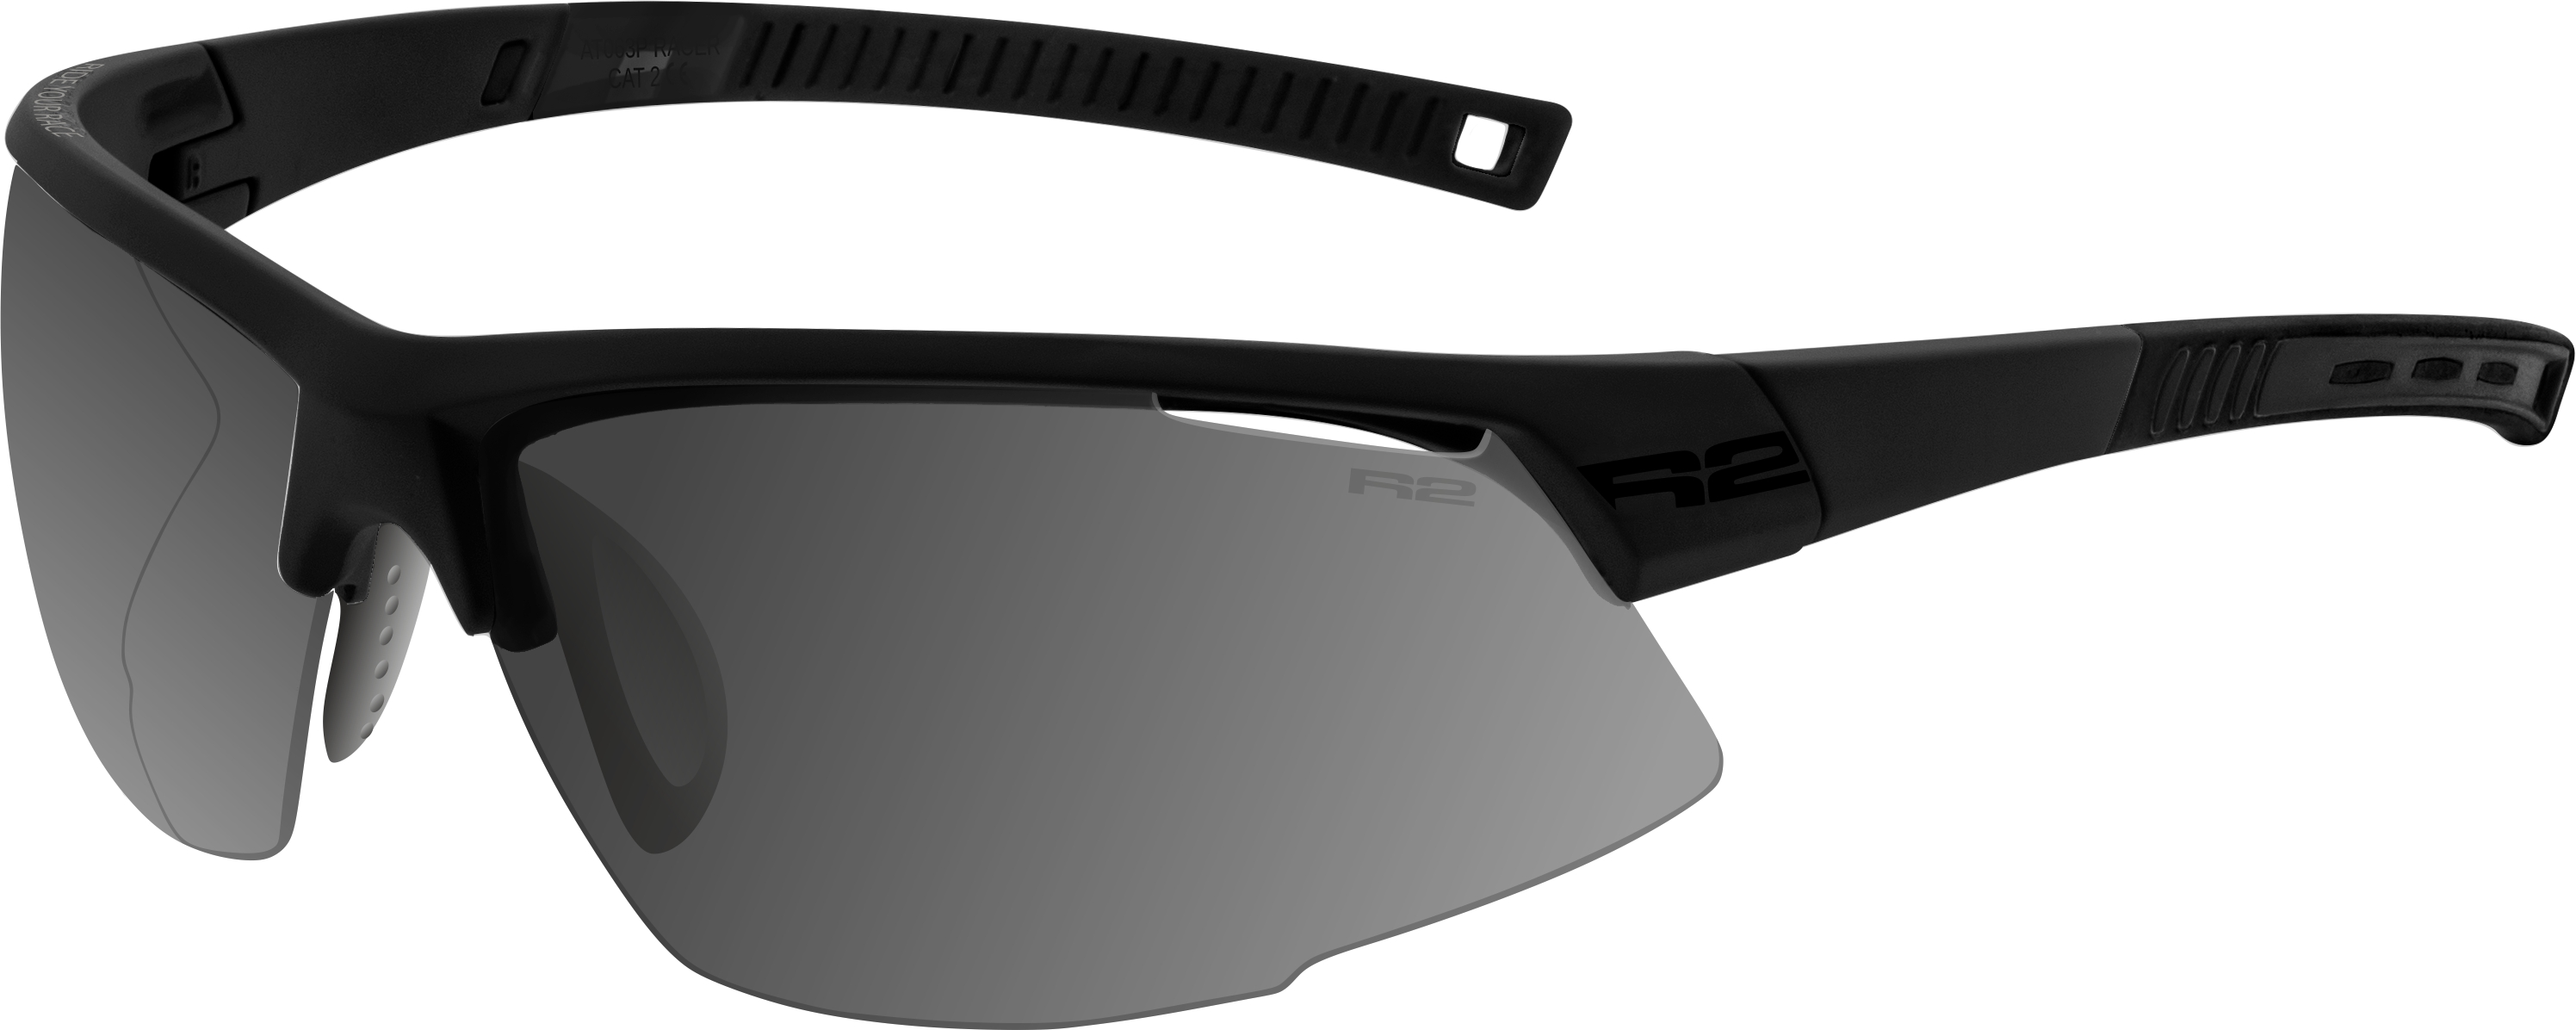 Sport sunglasses R2 RACER AT063A15